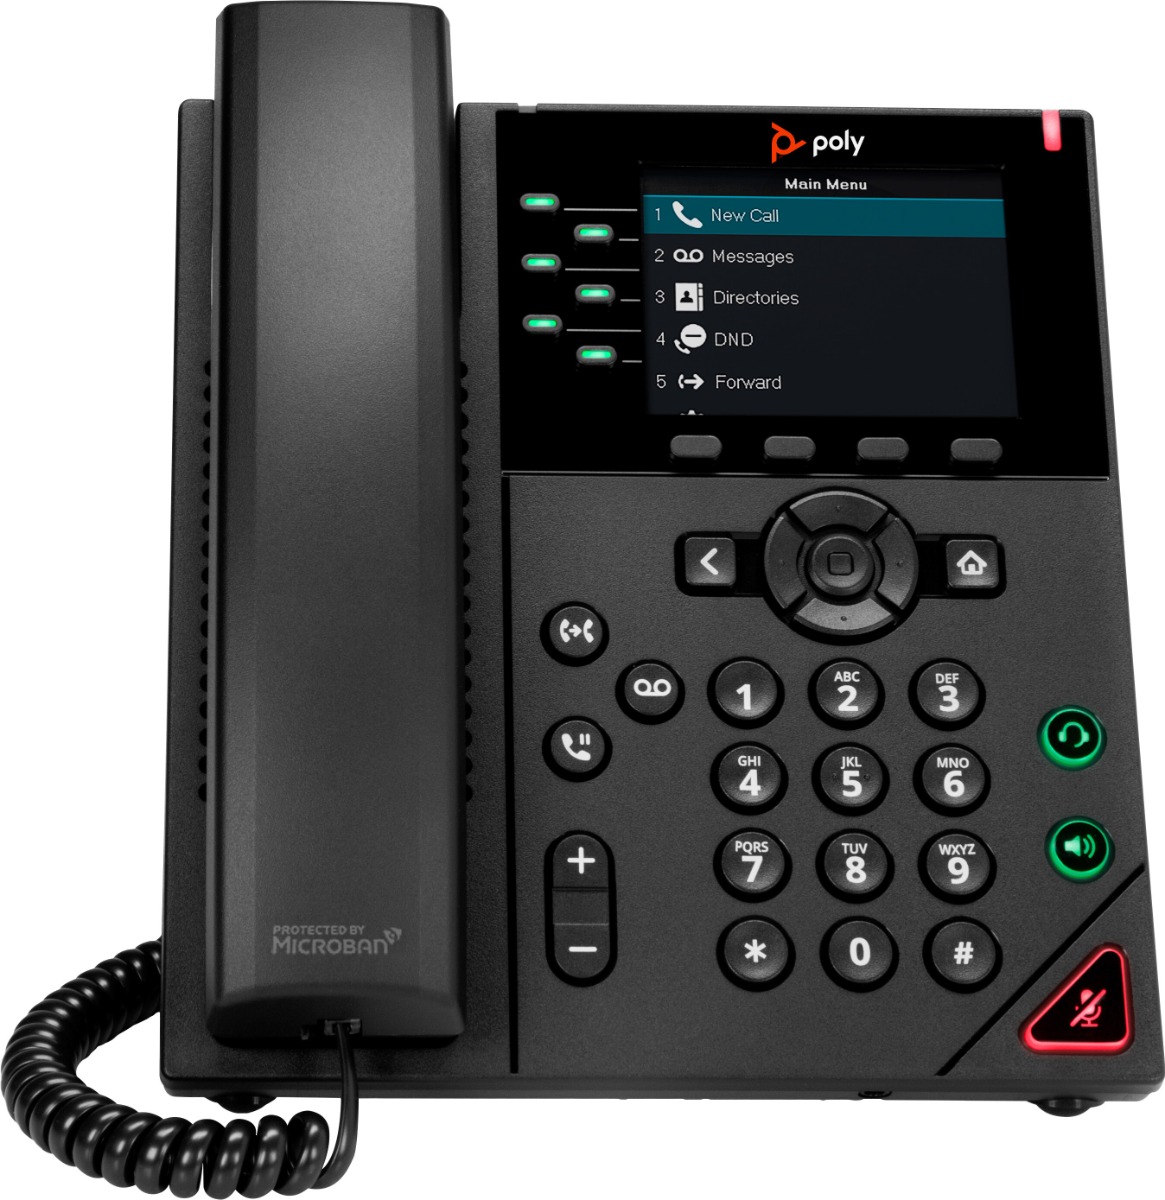 What is the color LCD resolution of the Polycom VVX 350 IP Desktop Phone?